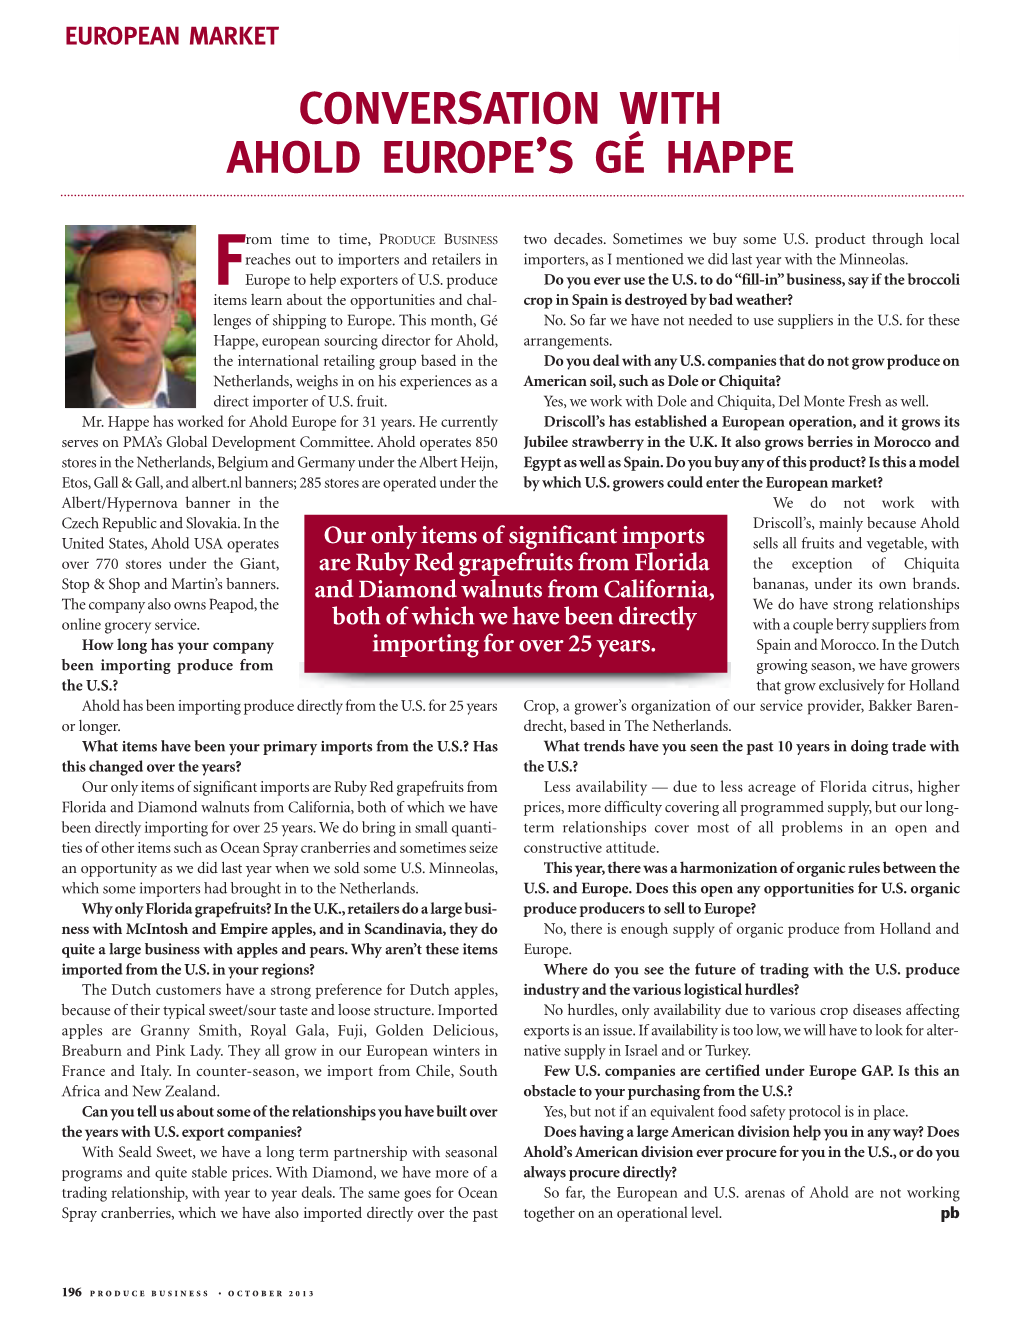 Conversation with Ahold Europe's Gé Happe